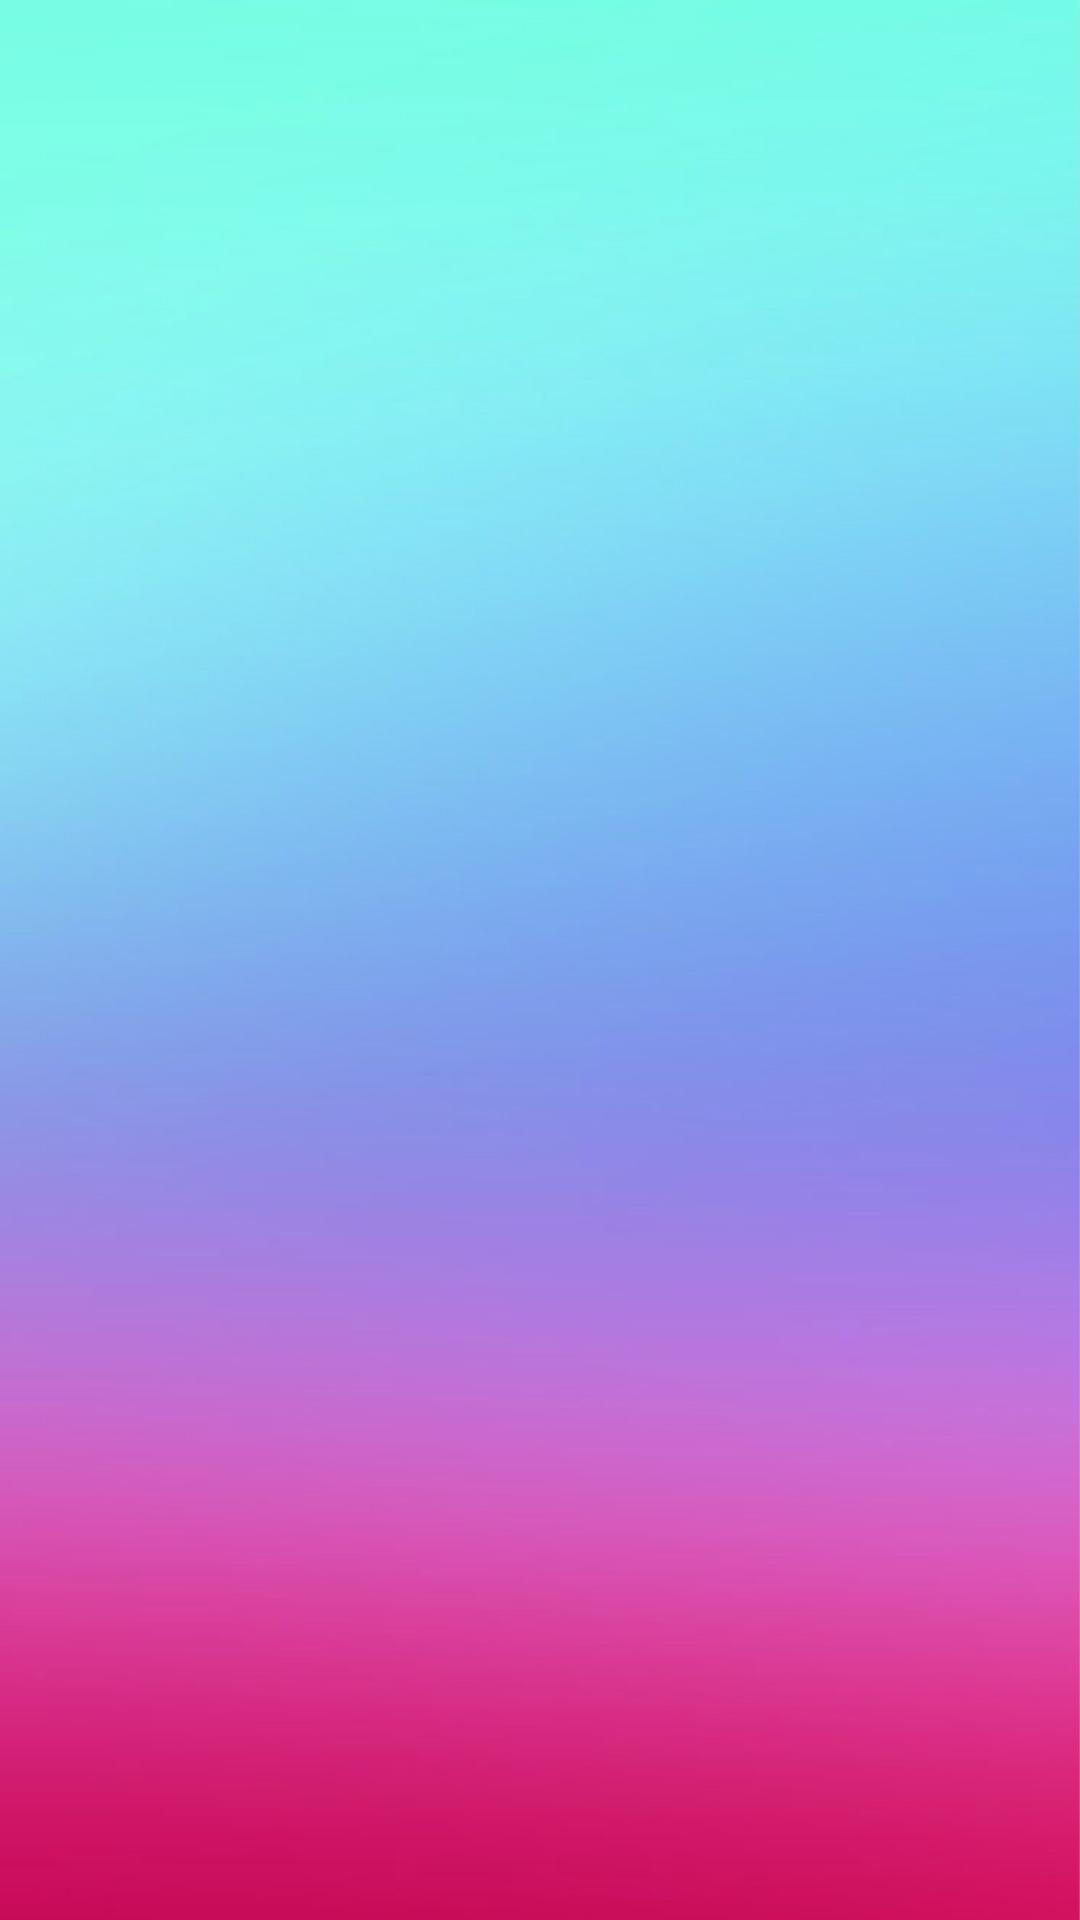 Color Gradation Blur Background iPhone 8 Wallpaper Free Download